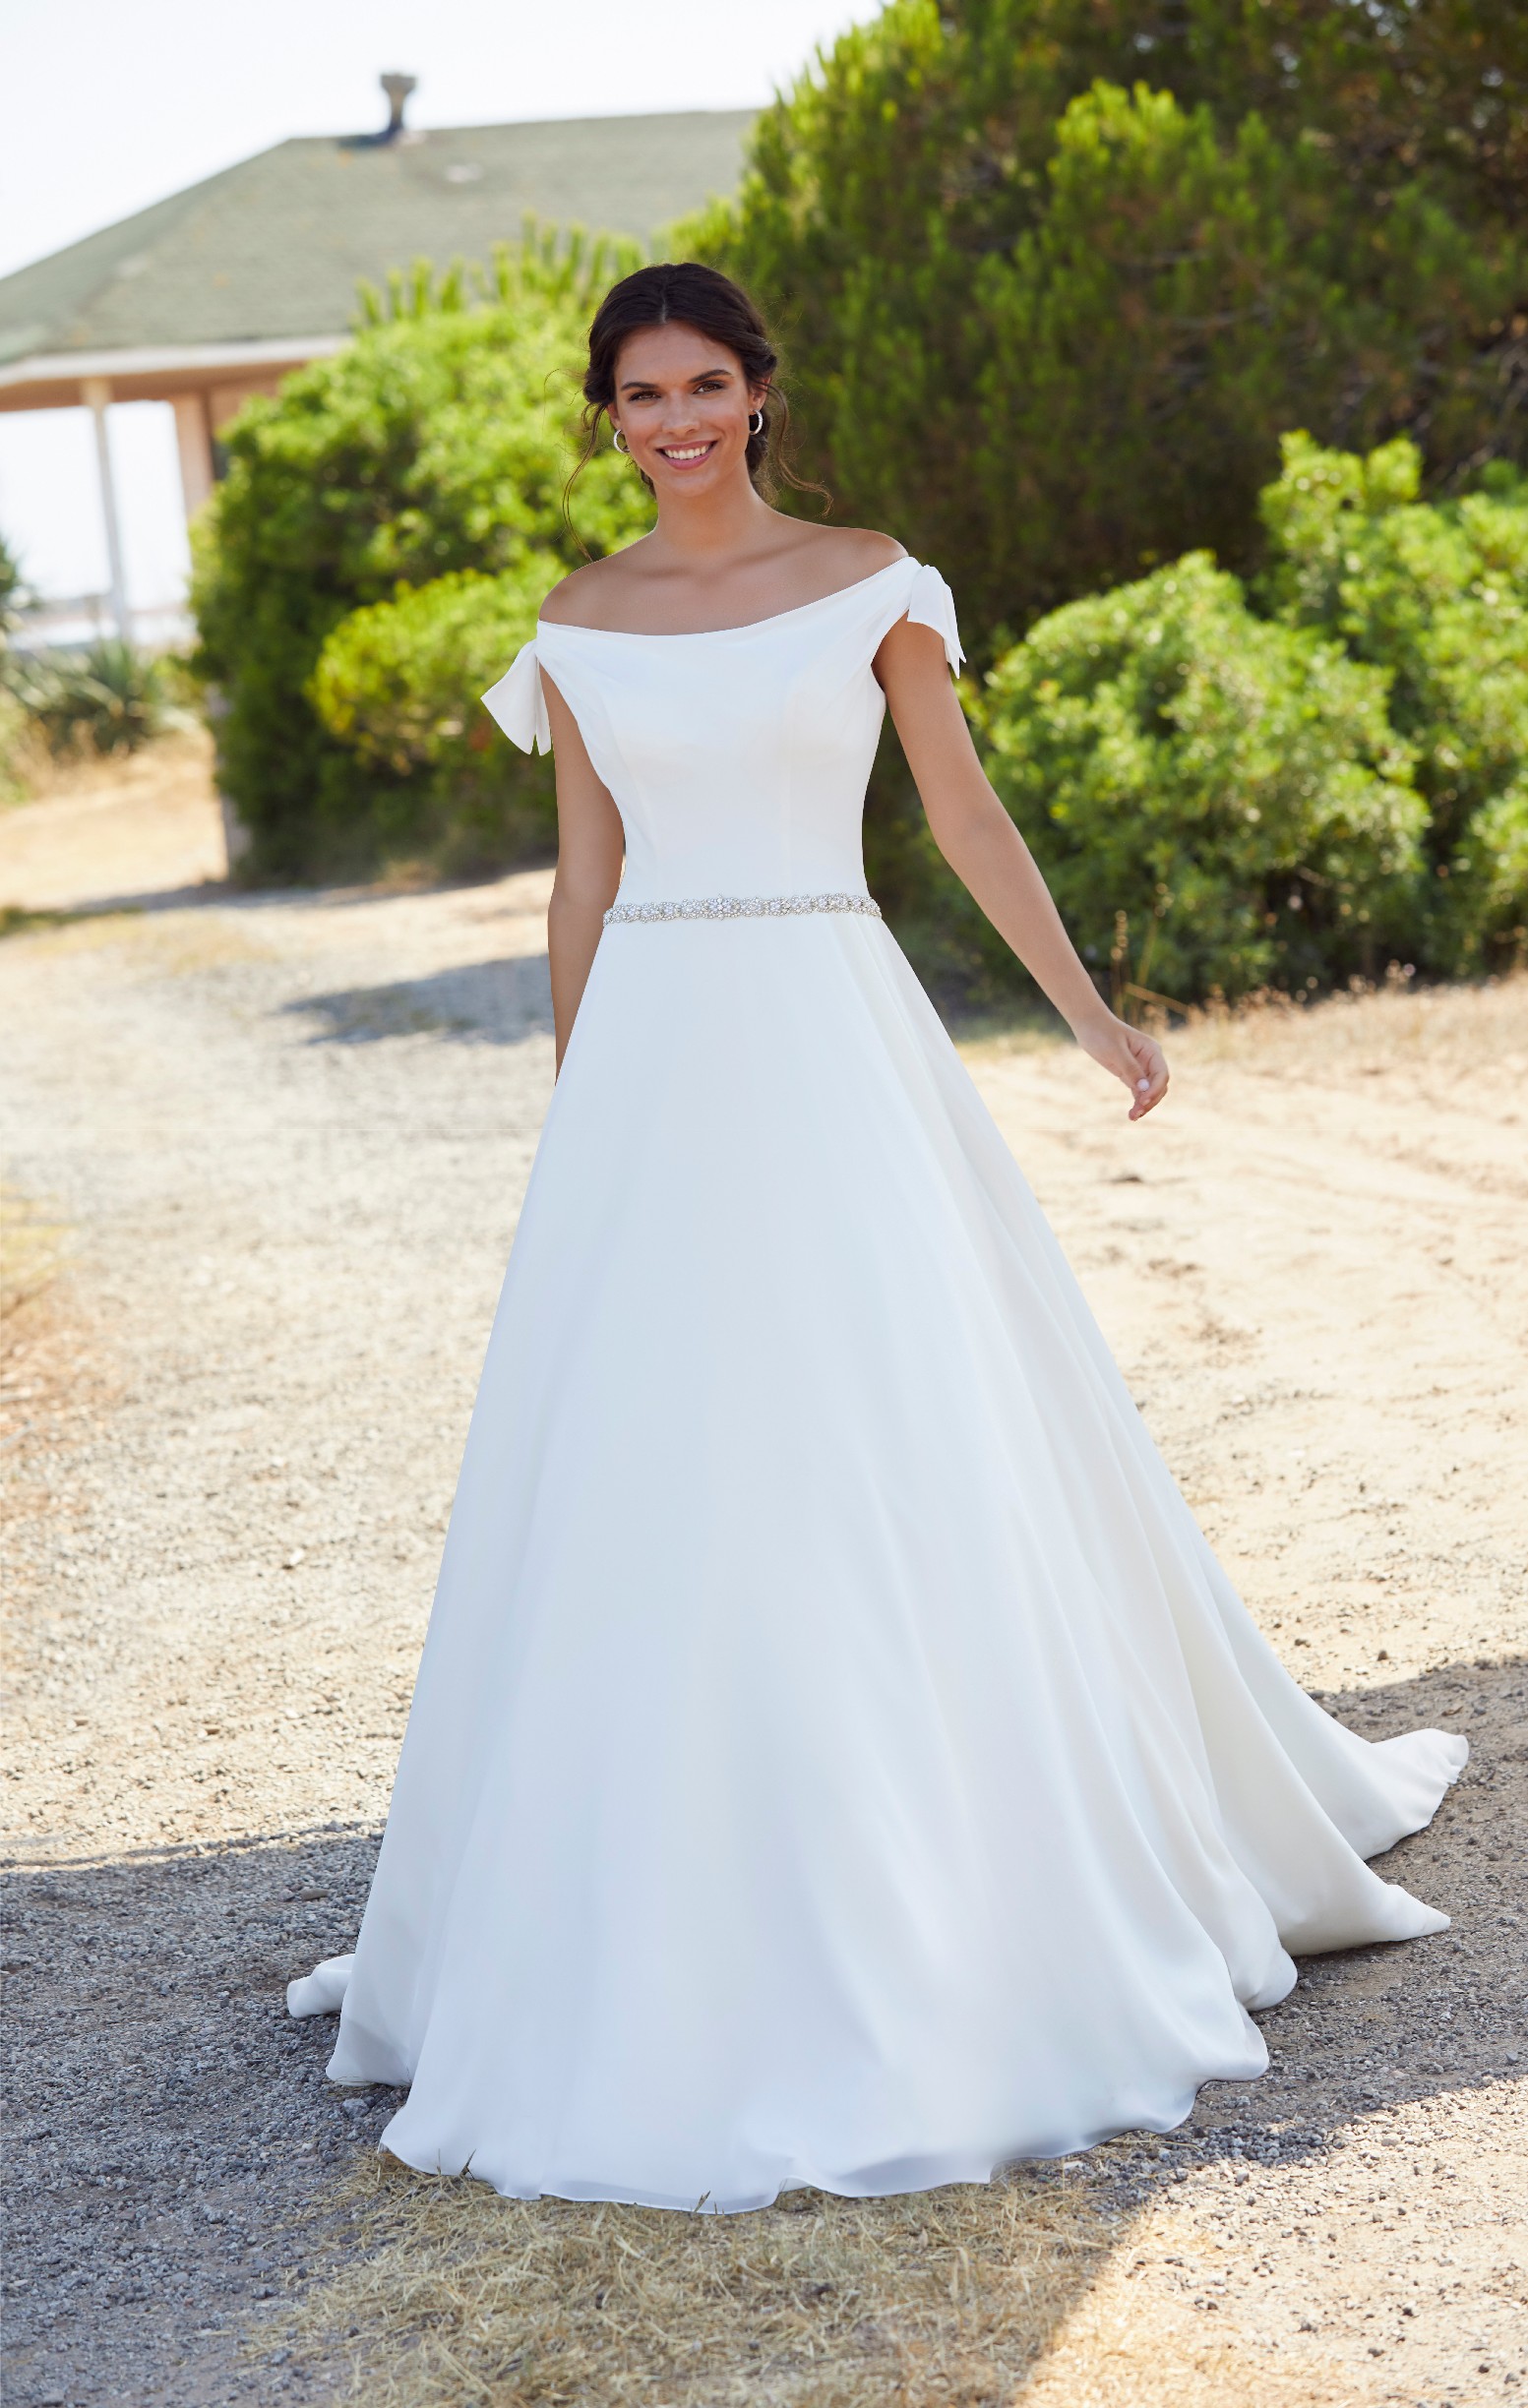 Woman stood in villa garden on sunny day wearing off the shoulder princess style ballgown wedding dress with embellished waist belt detail